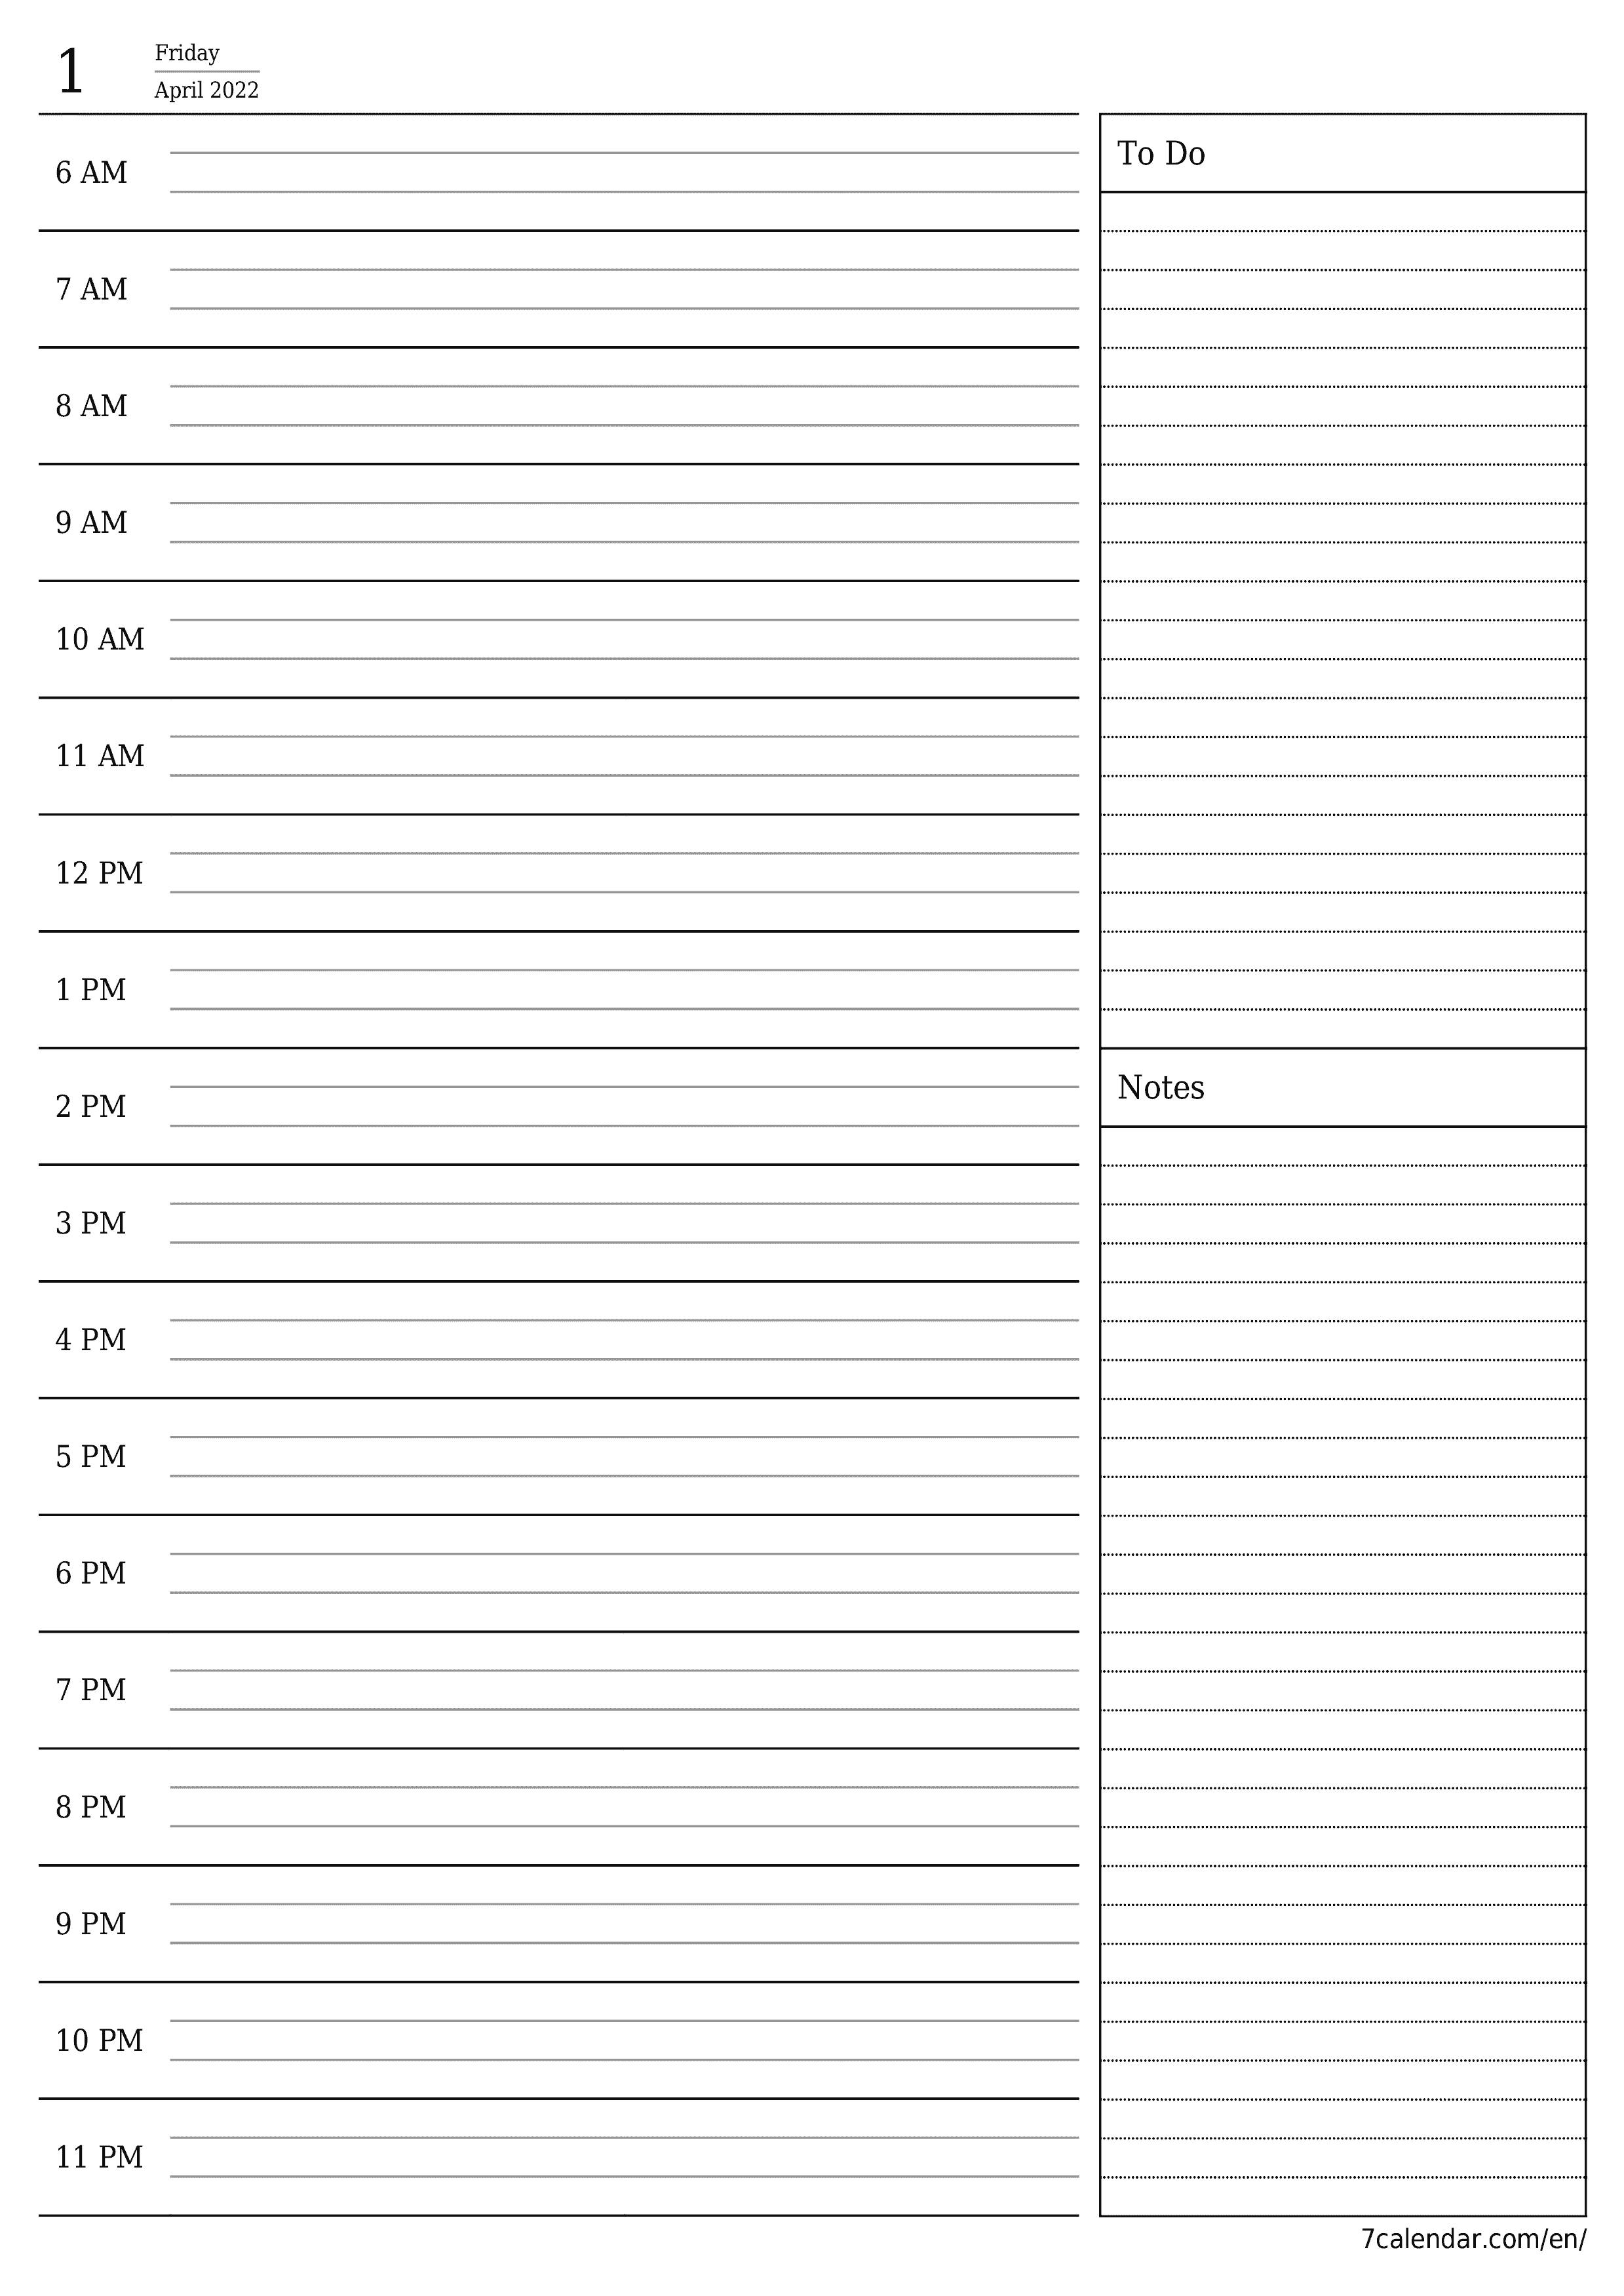 Blank daily calendar planner for day April 2022 with notes, save and print to PDF PNG English - 7calendar.com